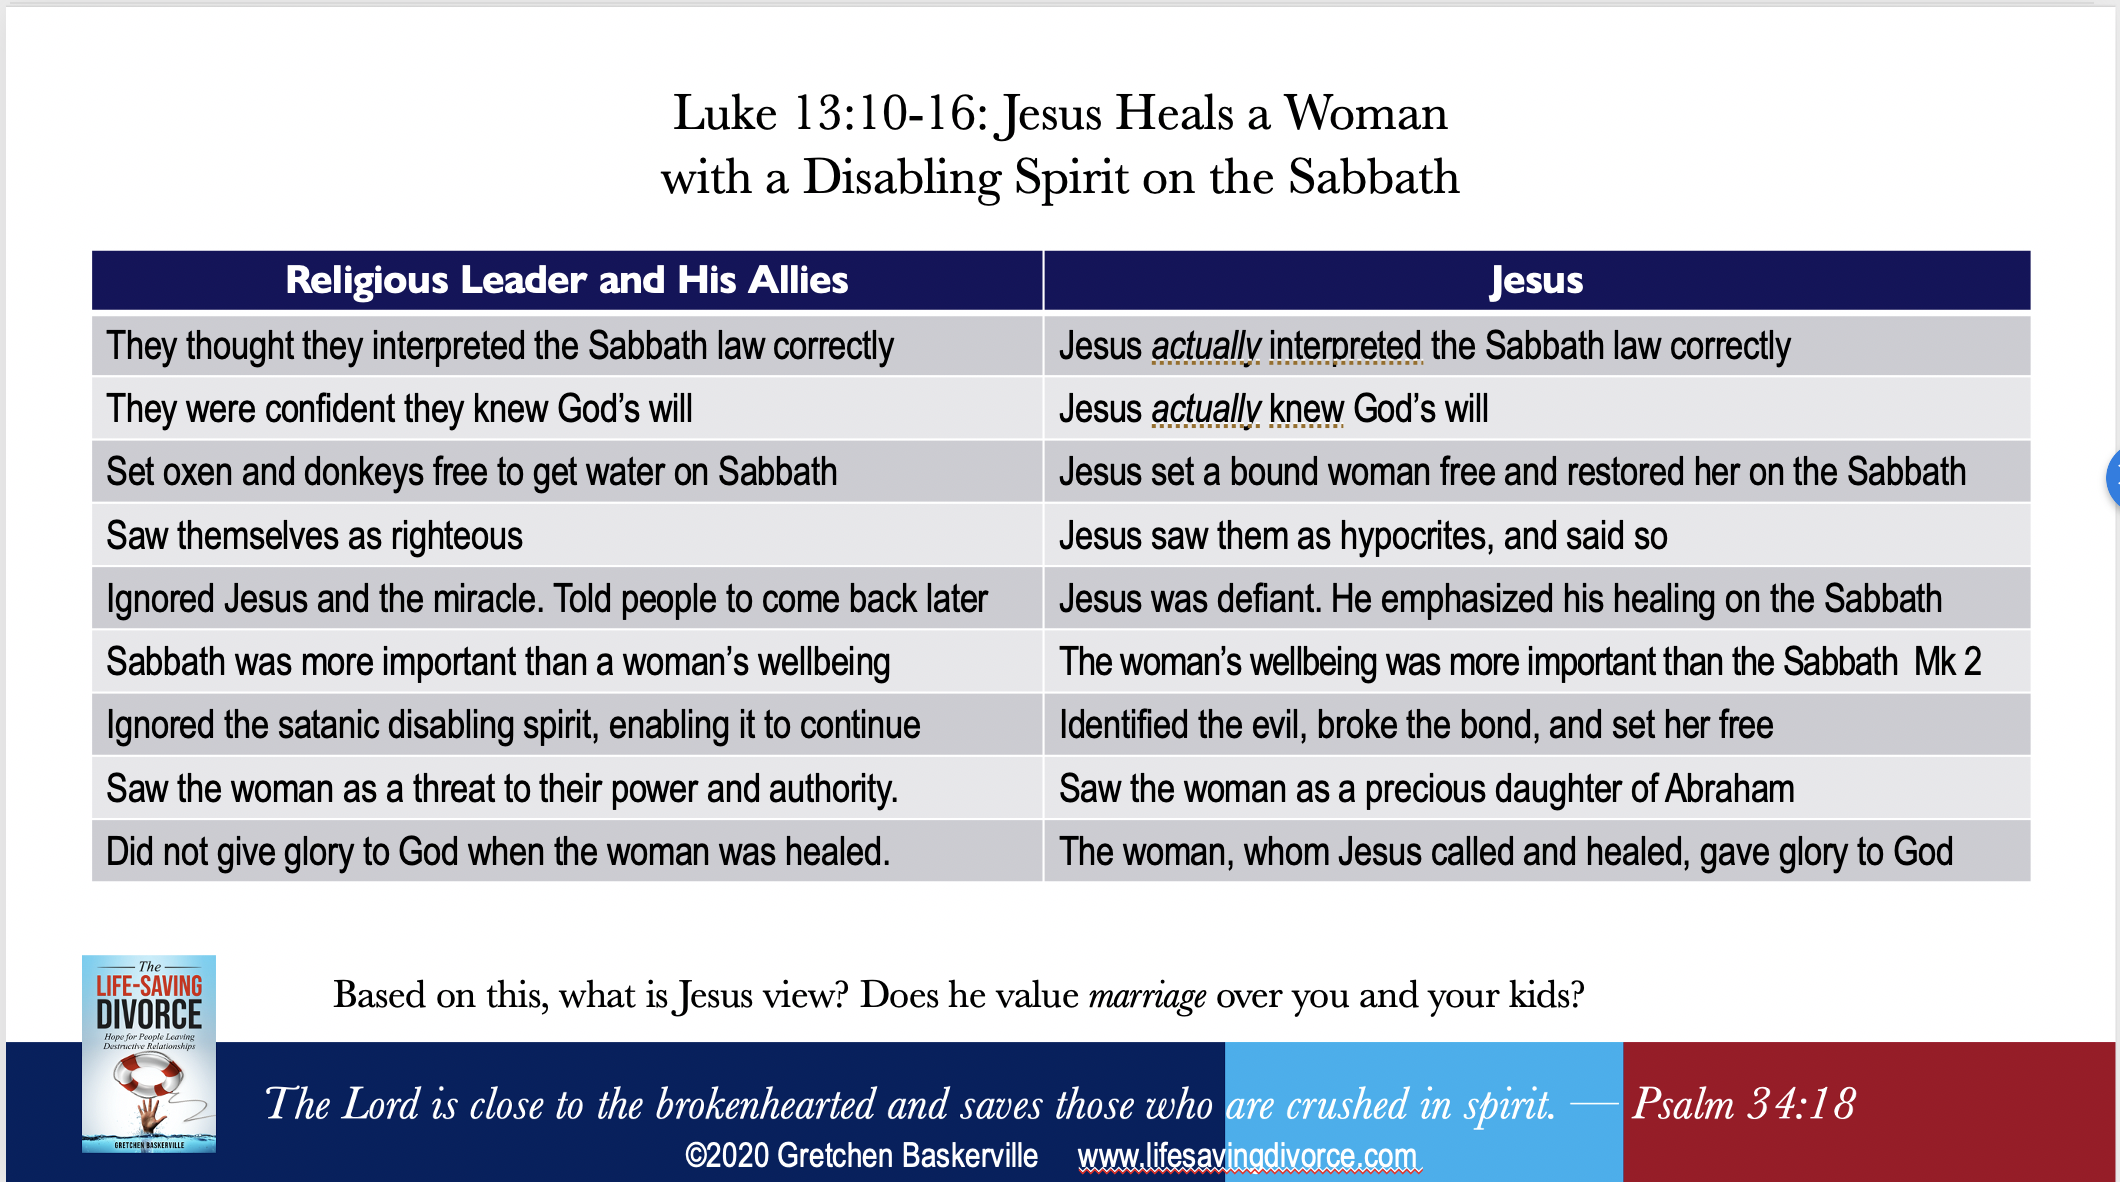 Luke 13: 10-16 Jesus Heals on the Sabbath Comparison Chart shows how Jesus reacted to the disabled women and contrasts it with how the synagogue leader did